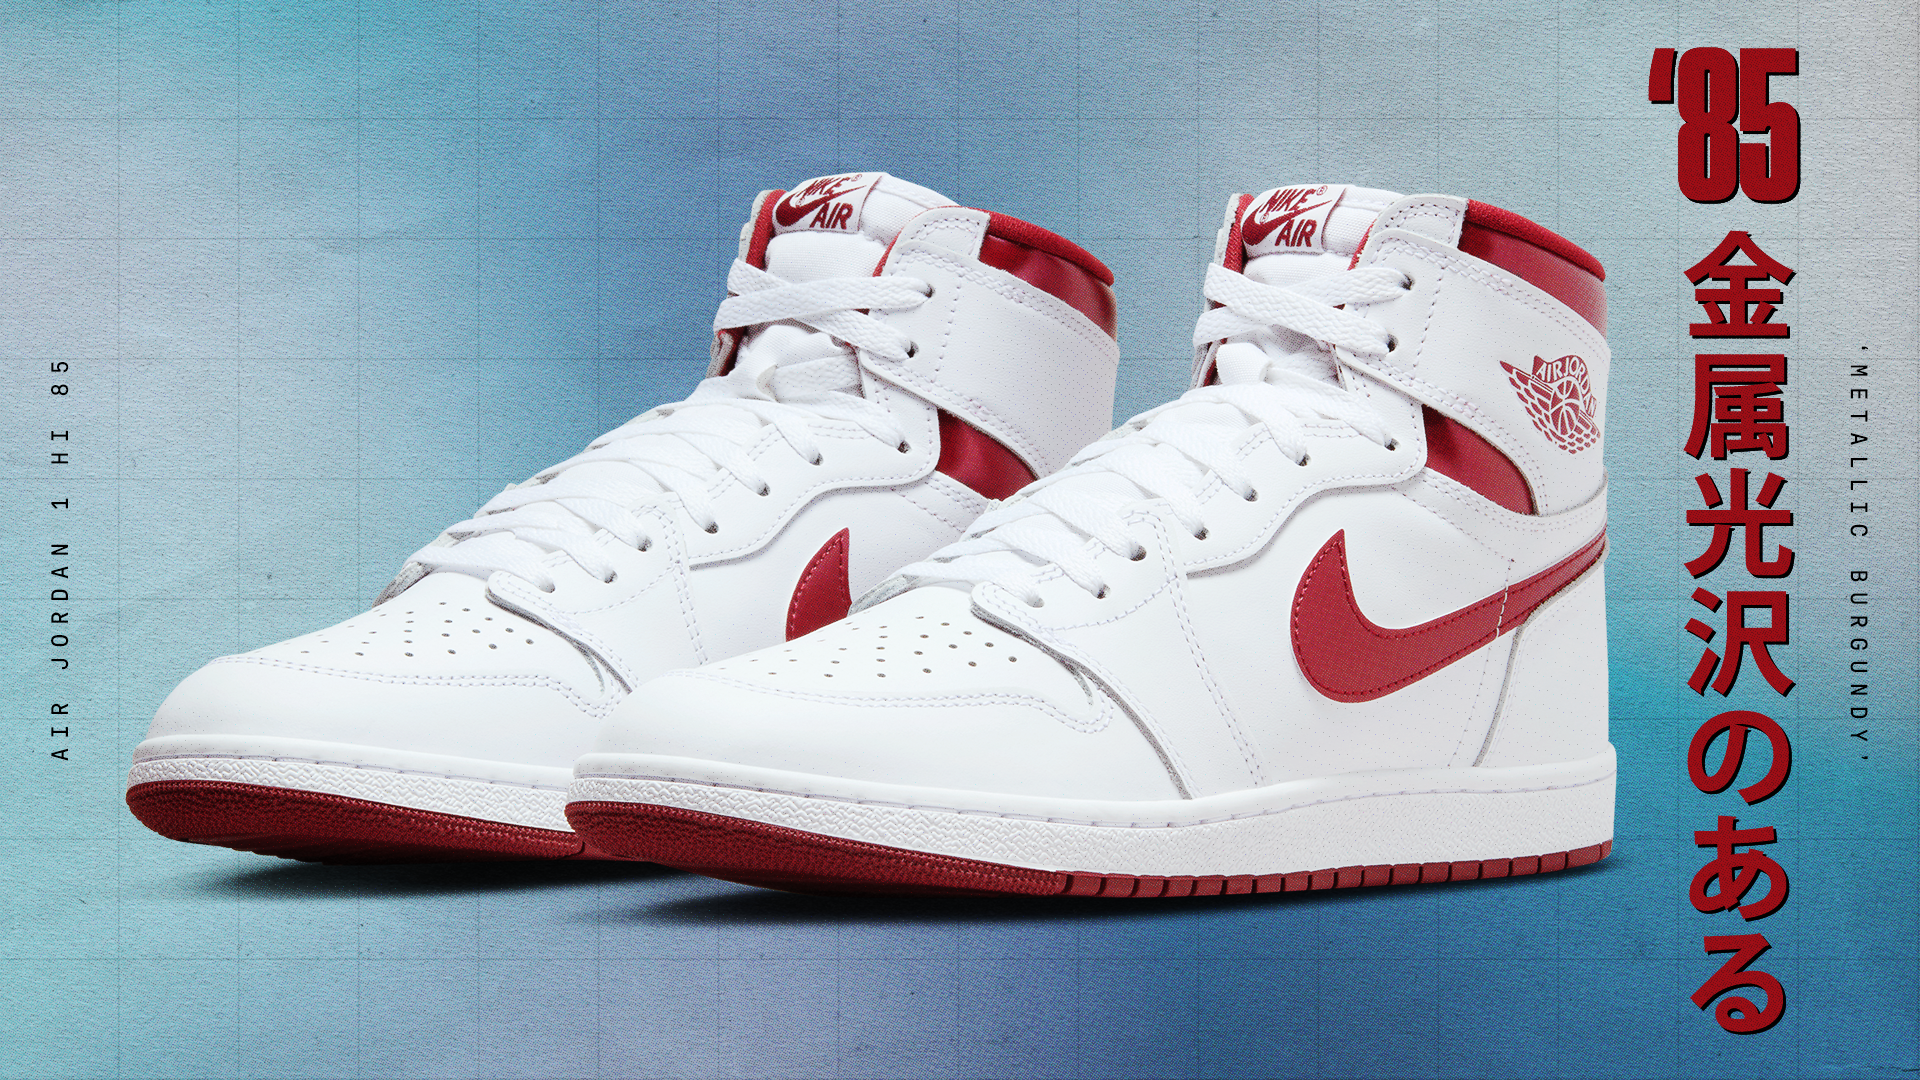 Air Jordan 1 Metallic Burgundy sneakers in white with red details, showcased with Japanese text on a blue gradient background. Smiling emoji